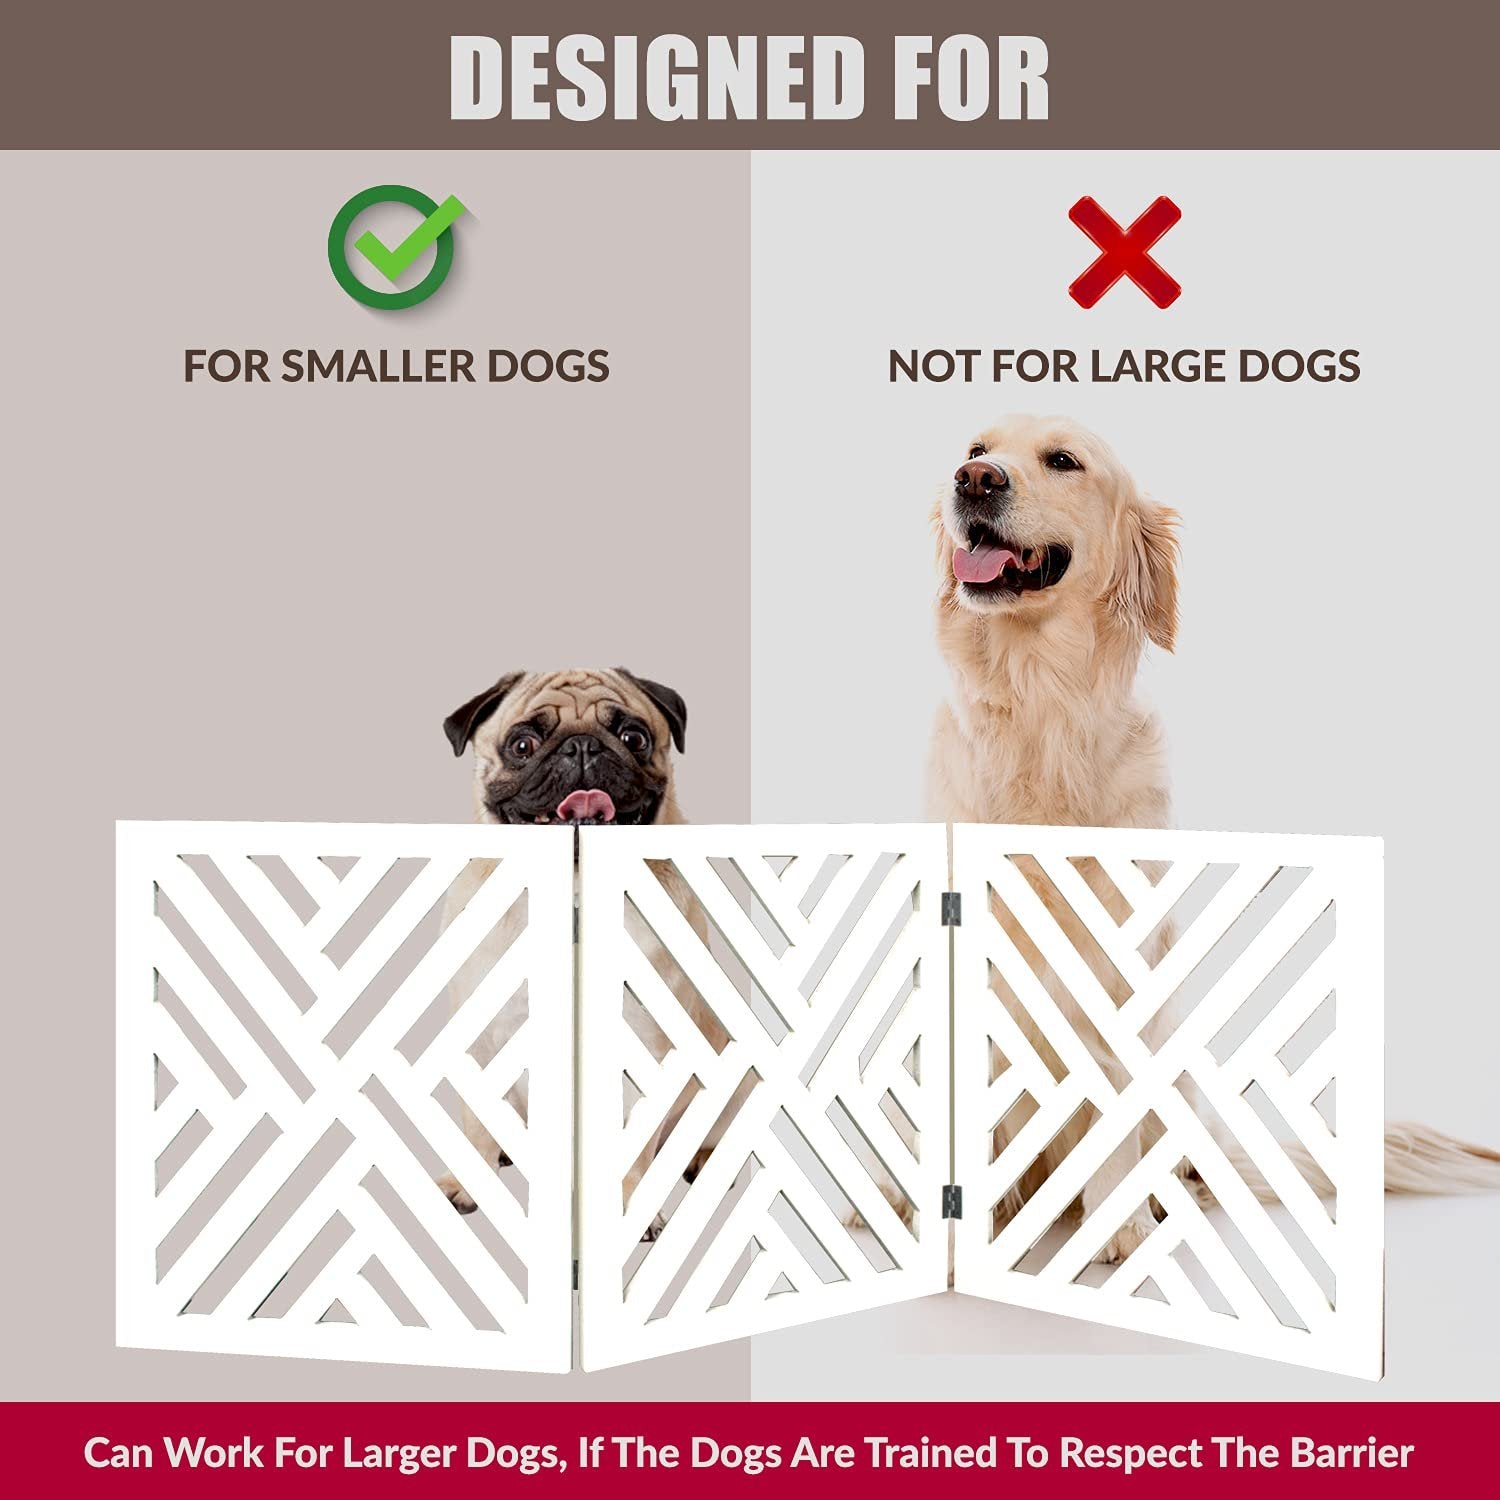 Bundaloo Freestanding Dog Gate Expandable Decorative Wooden Fence for Small to Medium Pet Dogs, Barrier for Stairs, Doorways, & Hallways (Lattice - White)